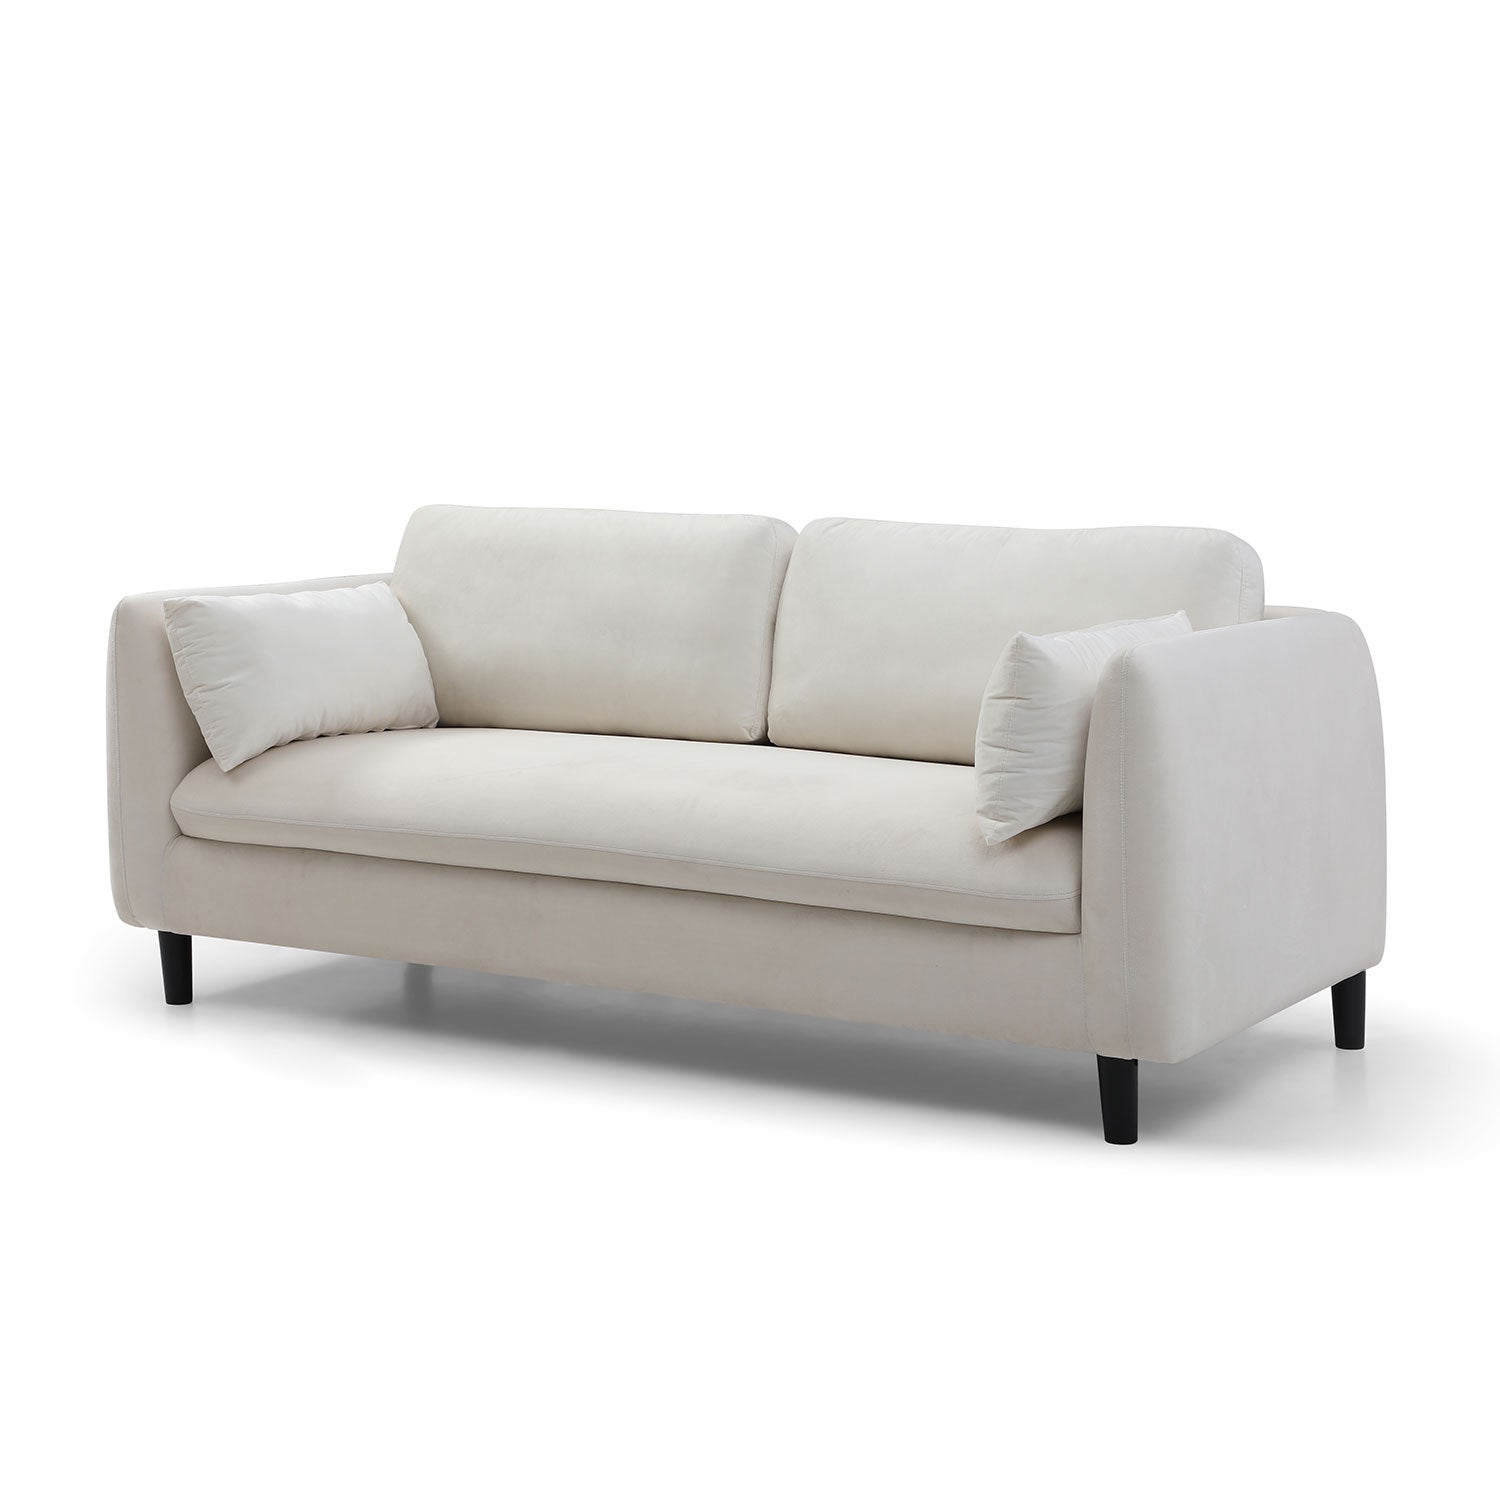 Pillowed Back Cushions and Rounded Arms, Durable beige-fabric